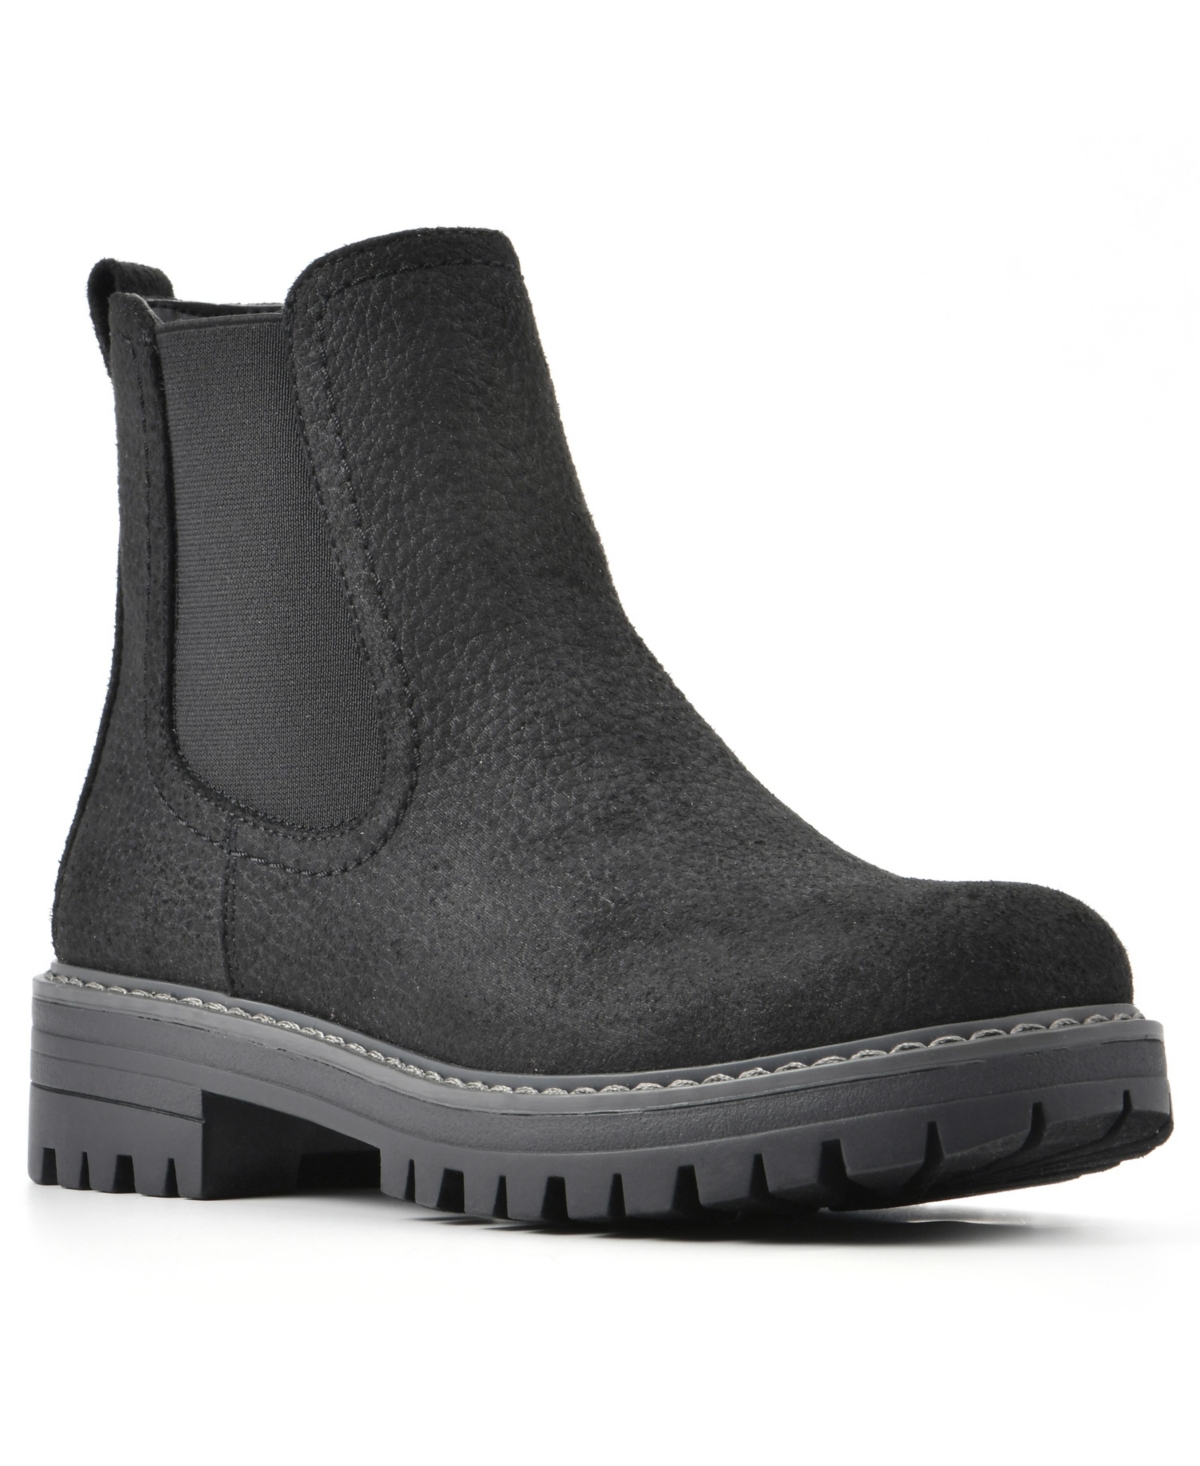 Women's Mastery Chelsea Boots - Black, Fabric- Textile